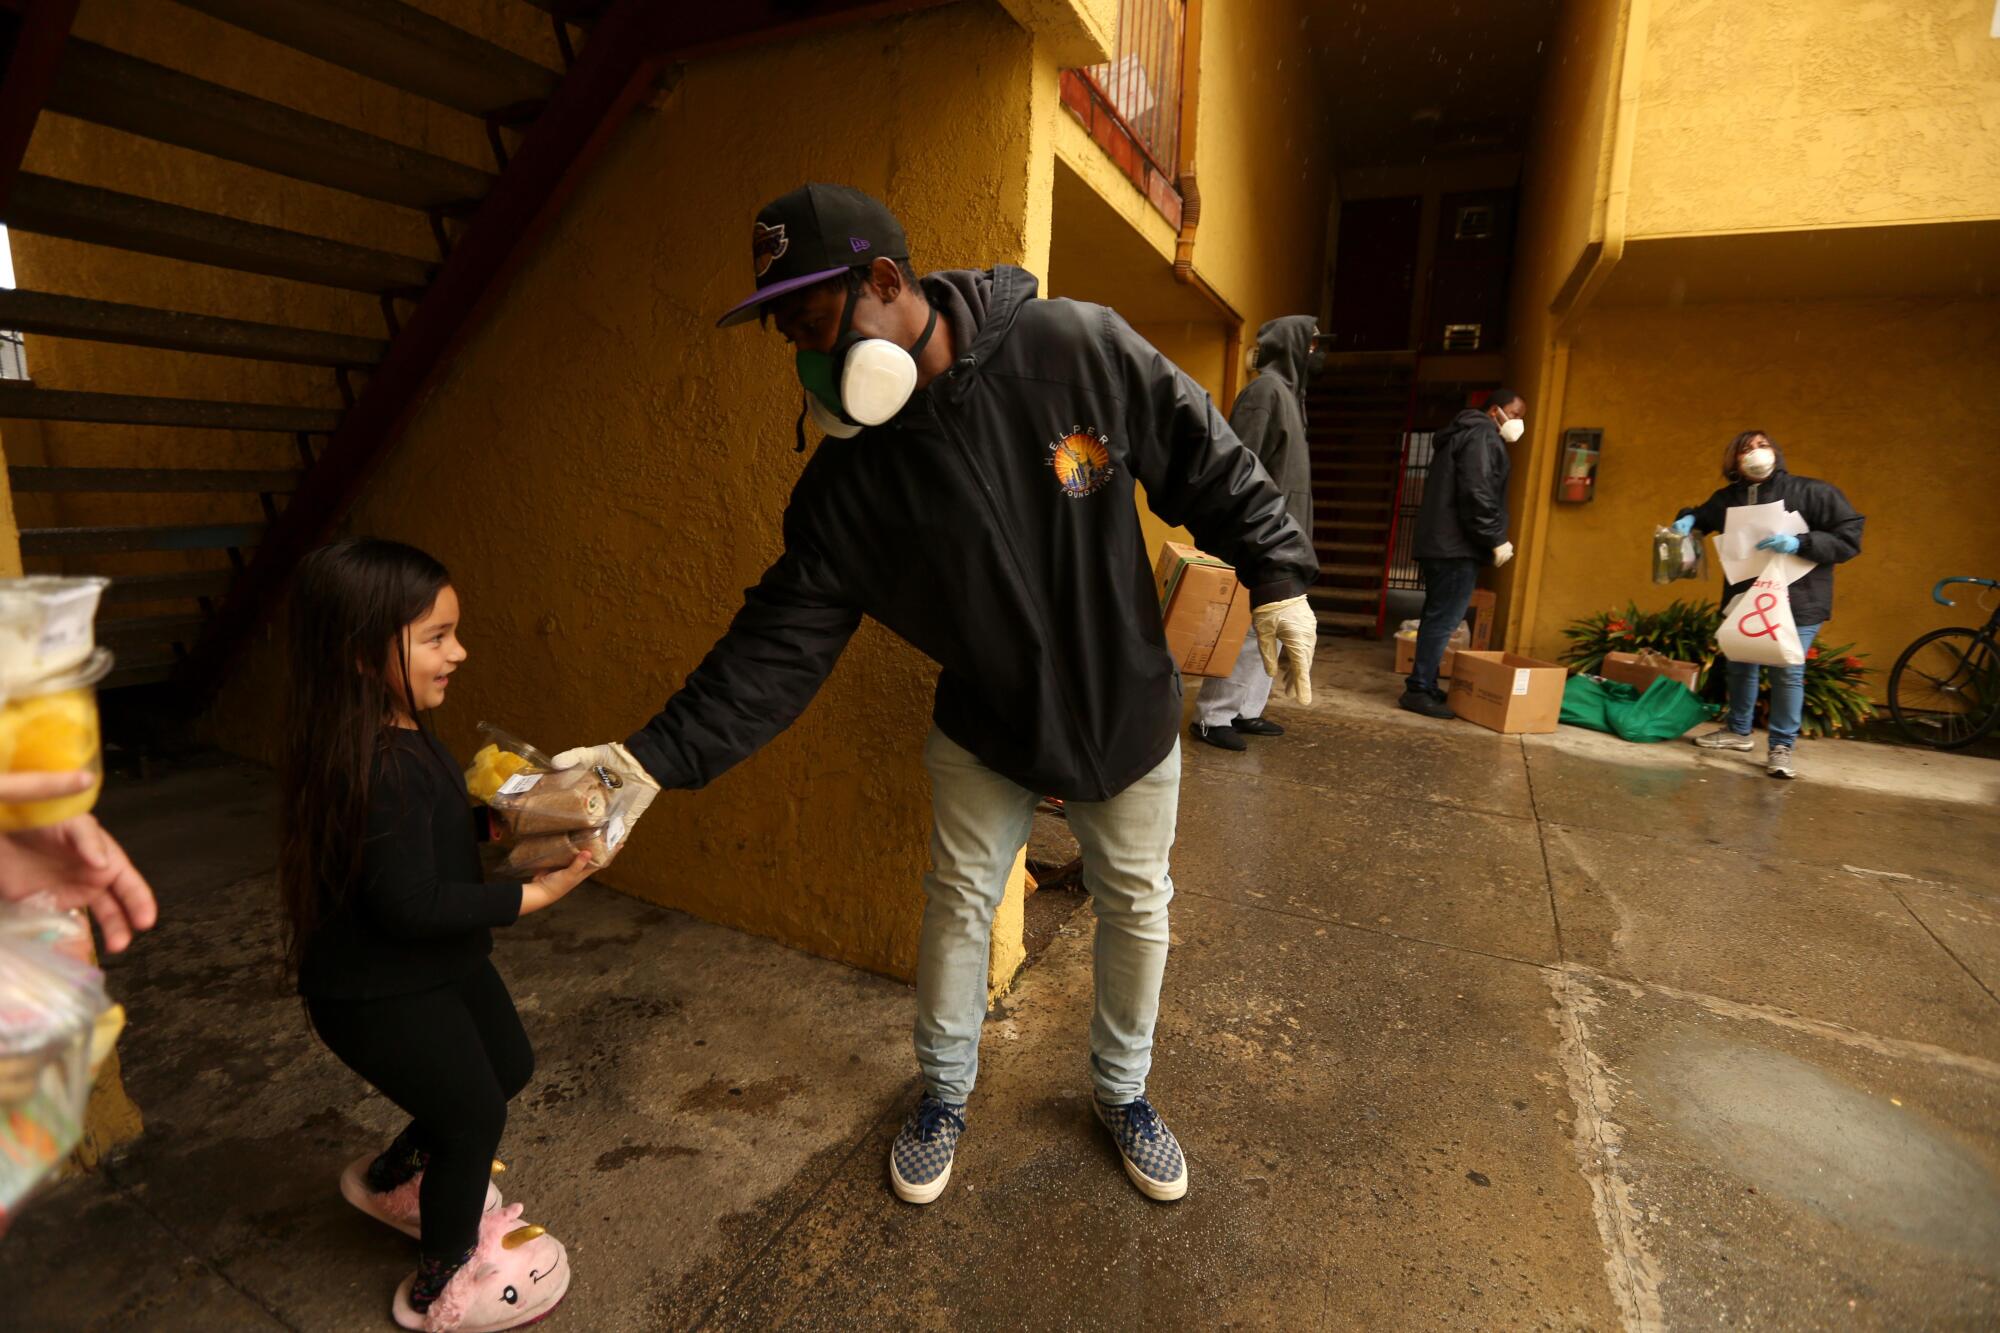 Ebay Williams, right, with the H.E.L.P.E.R. Foundation, gives a youngster and her family groceries at a low income government building in the Oakwood neighborhood in Venice.